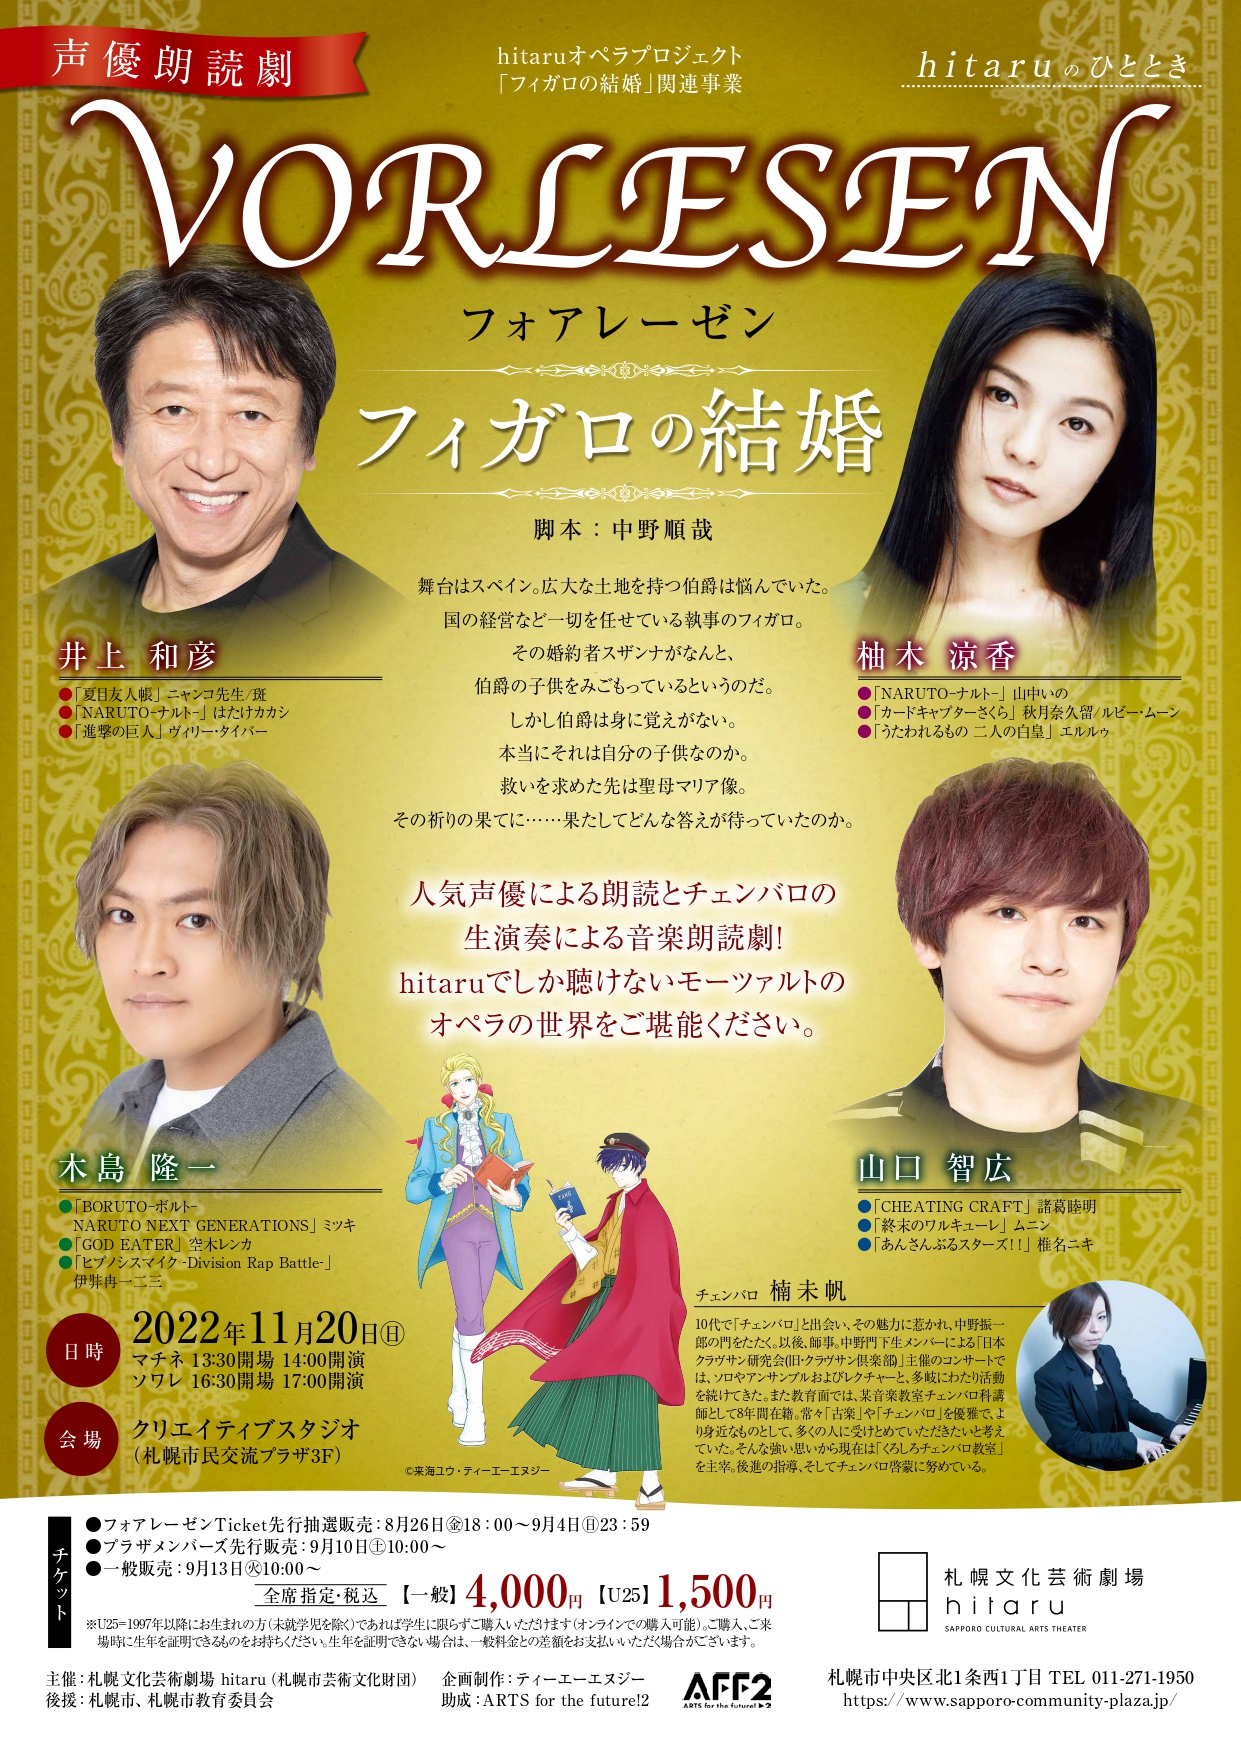 Event related to the hitaru Opera Project “The Marriage of Figaro”Moments at hitaru: A Theatrical Reading of “The Marriage of Figaro” by the Vorlesen Voice Actors image